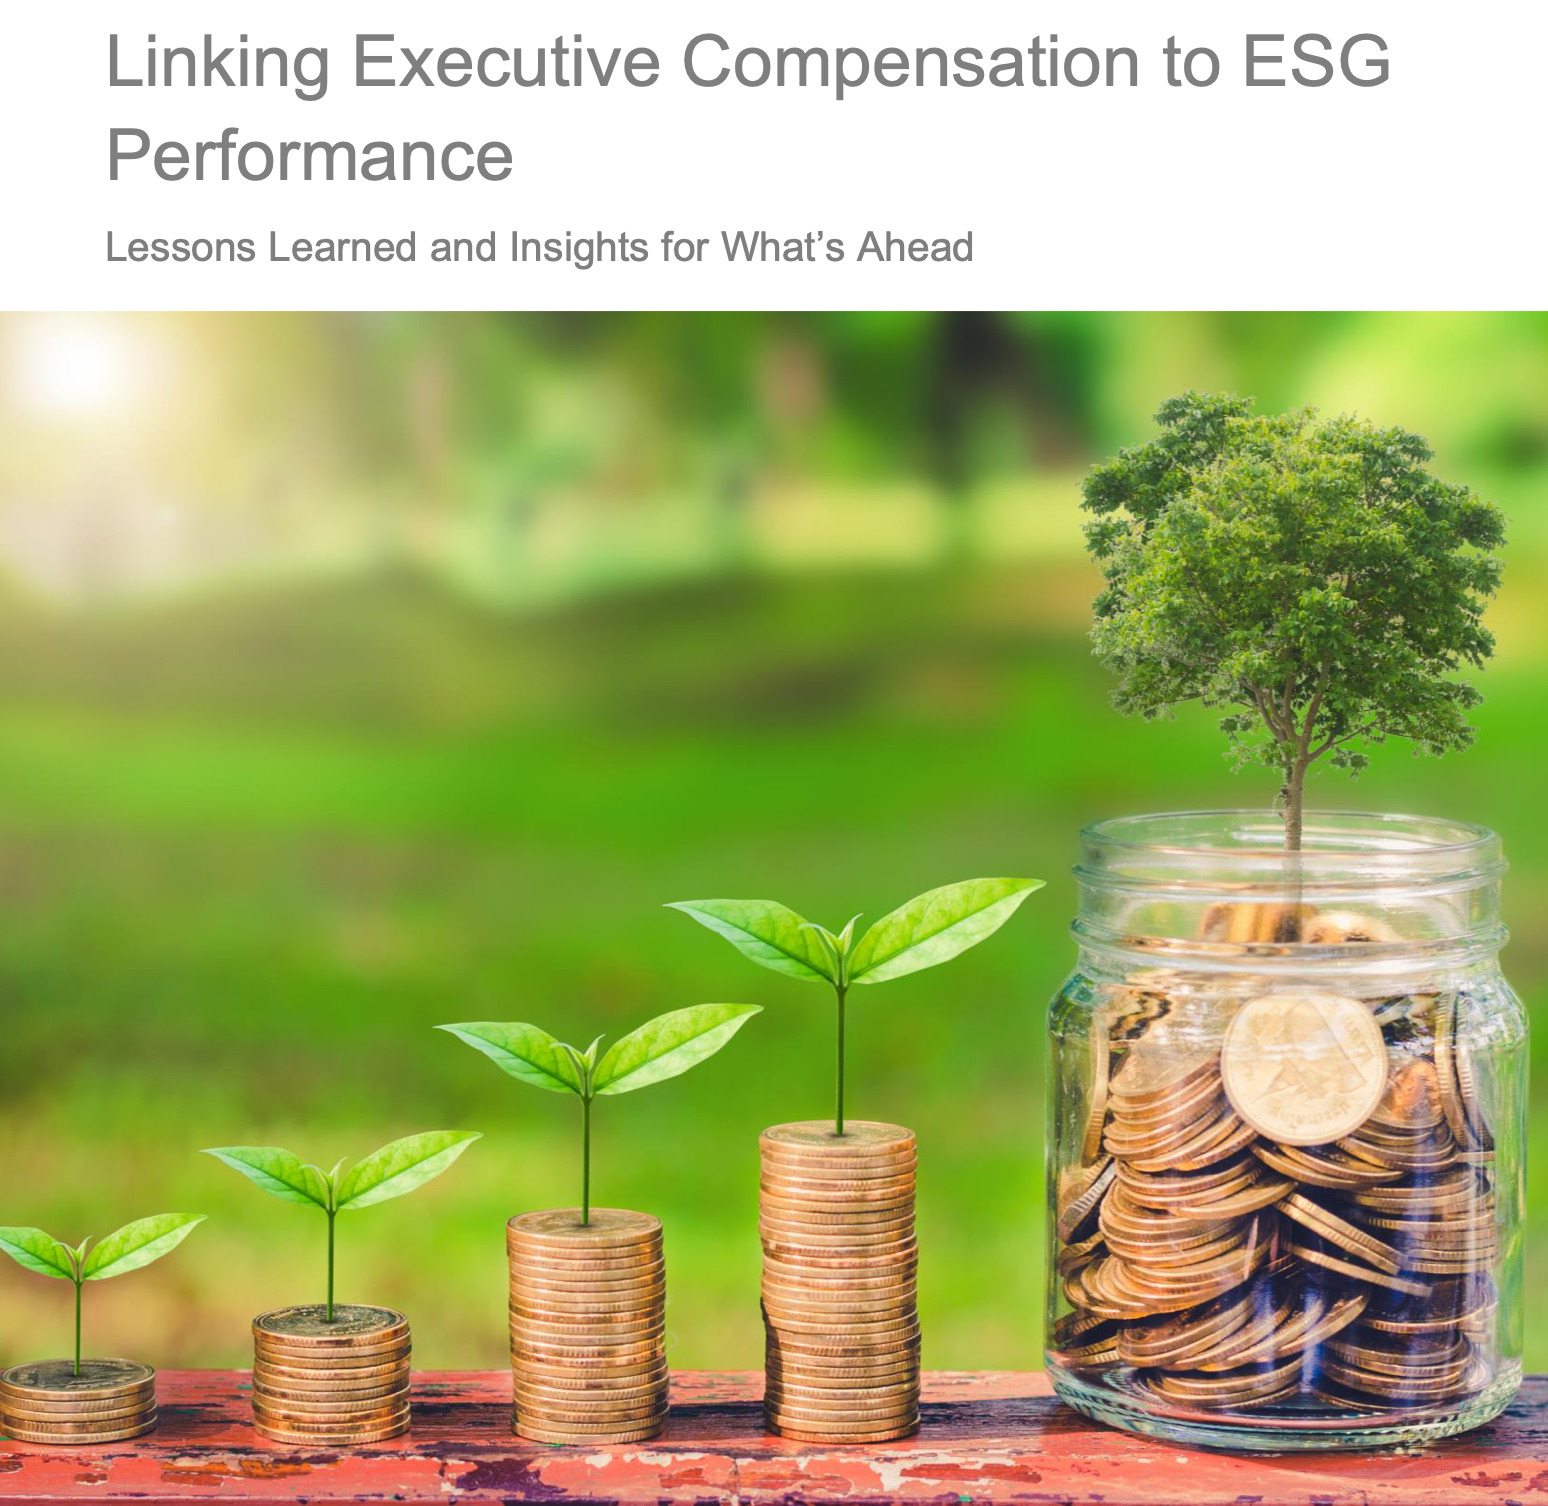 The Conference Board has published the report: „Linking Executive Compensation to ESG Performance“